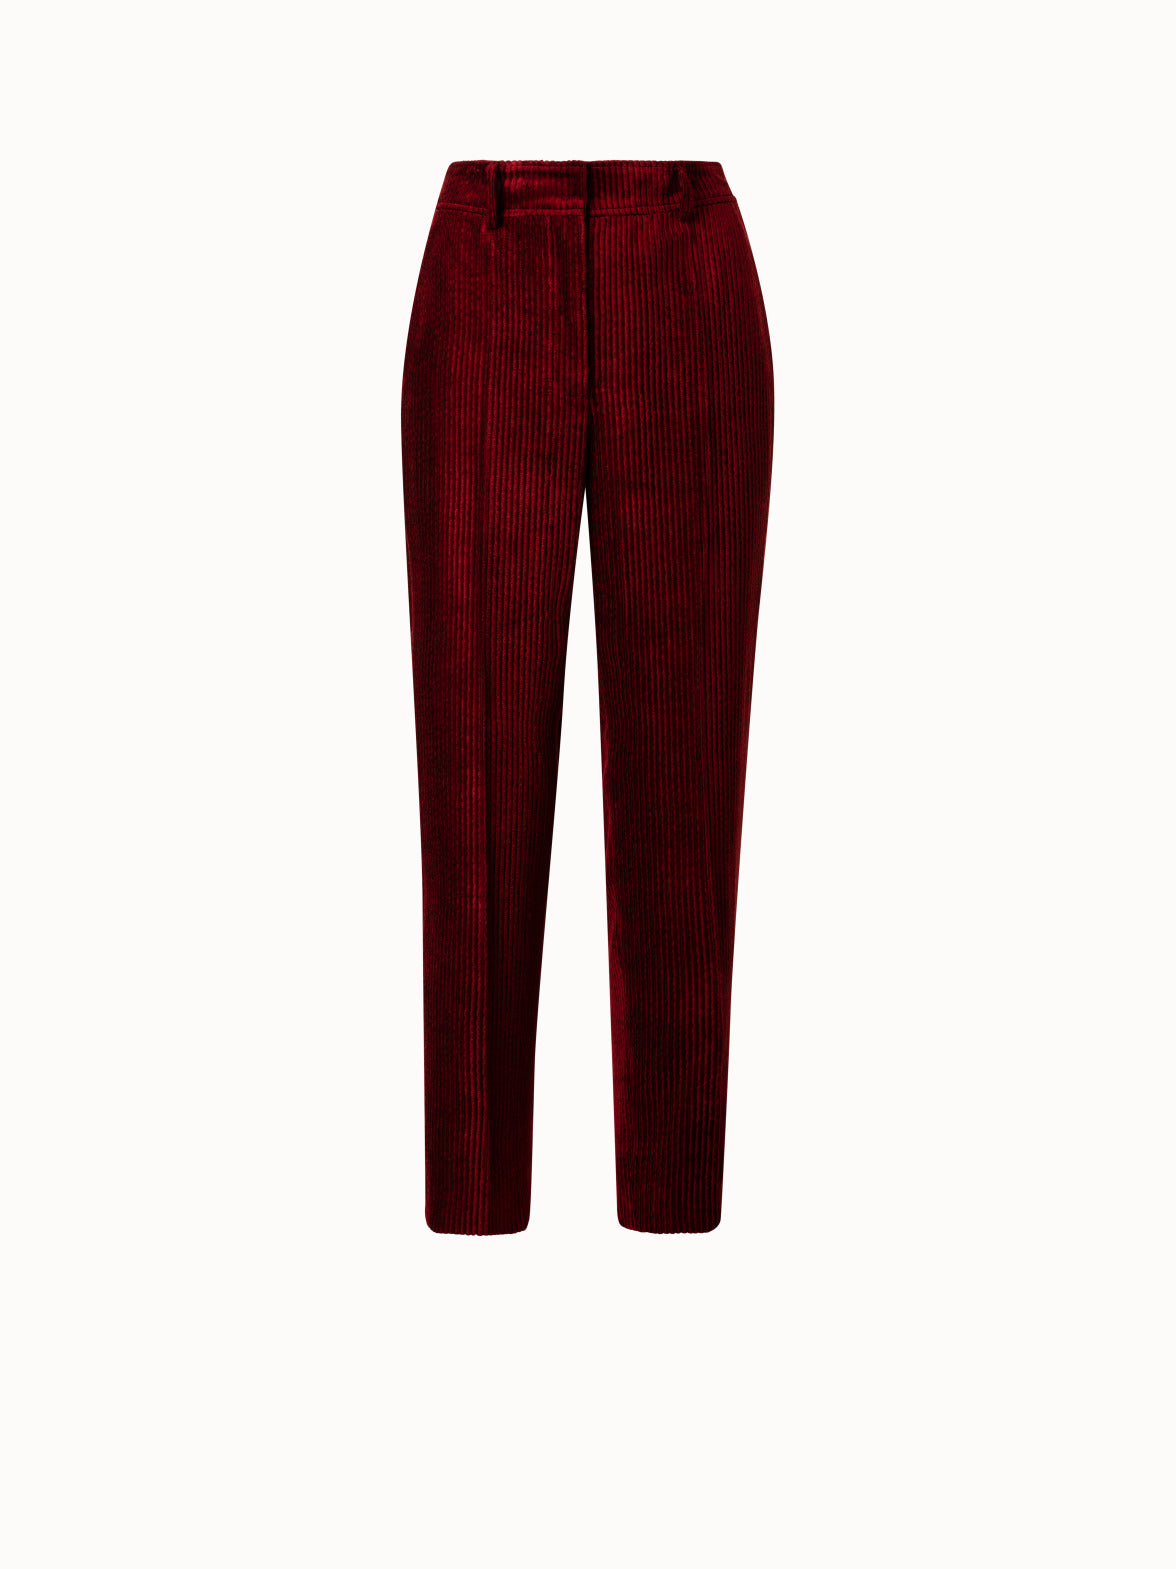 PURDEY Pleated cotton-corduroy tapered pants | NET-A-PORTER